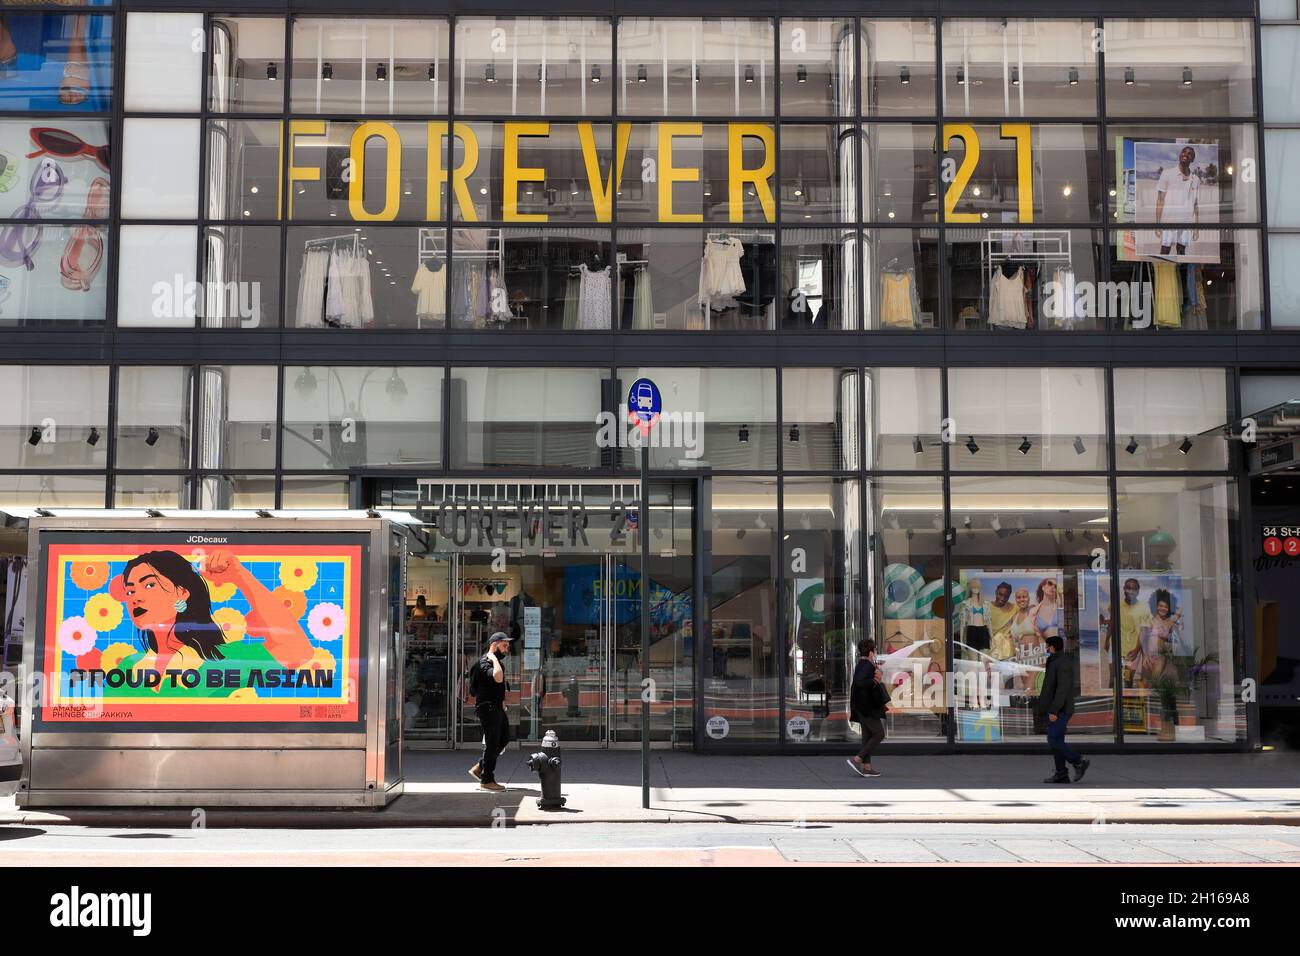 Forever 21 Store In Times Square Nyc Stock Photo - Download Image Now -  Disney Store, Times Square - Manhattan, Forever 21 - iStock